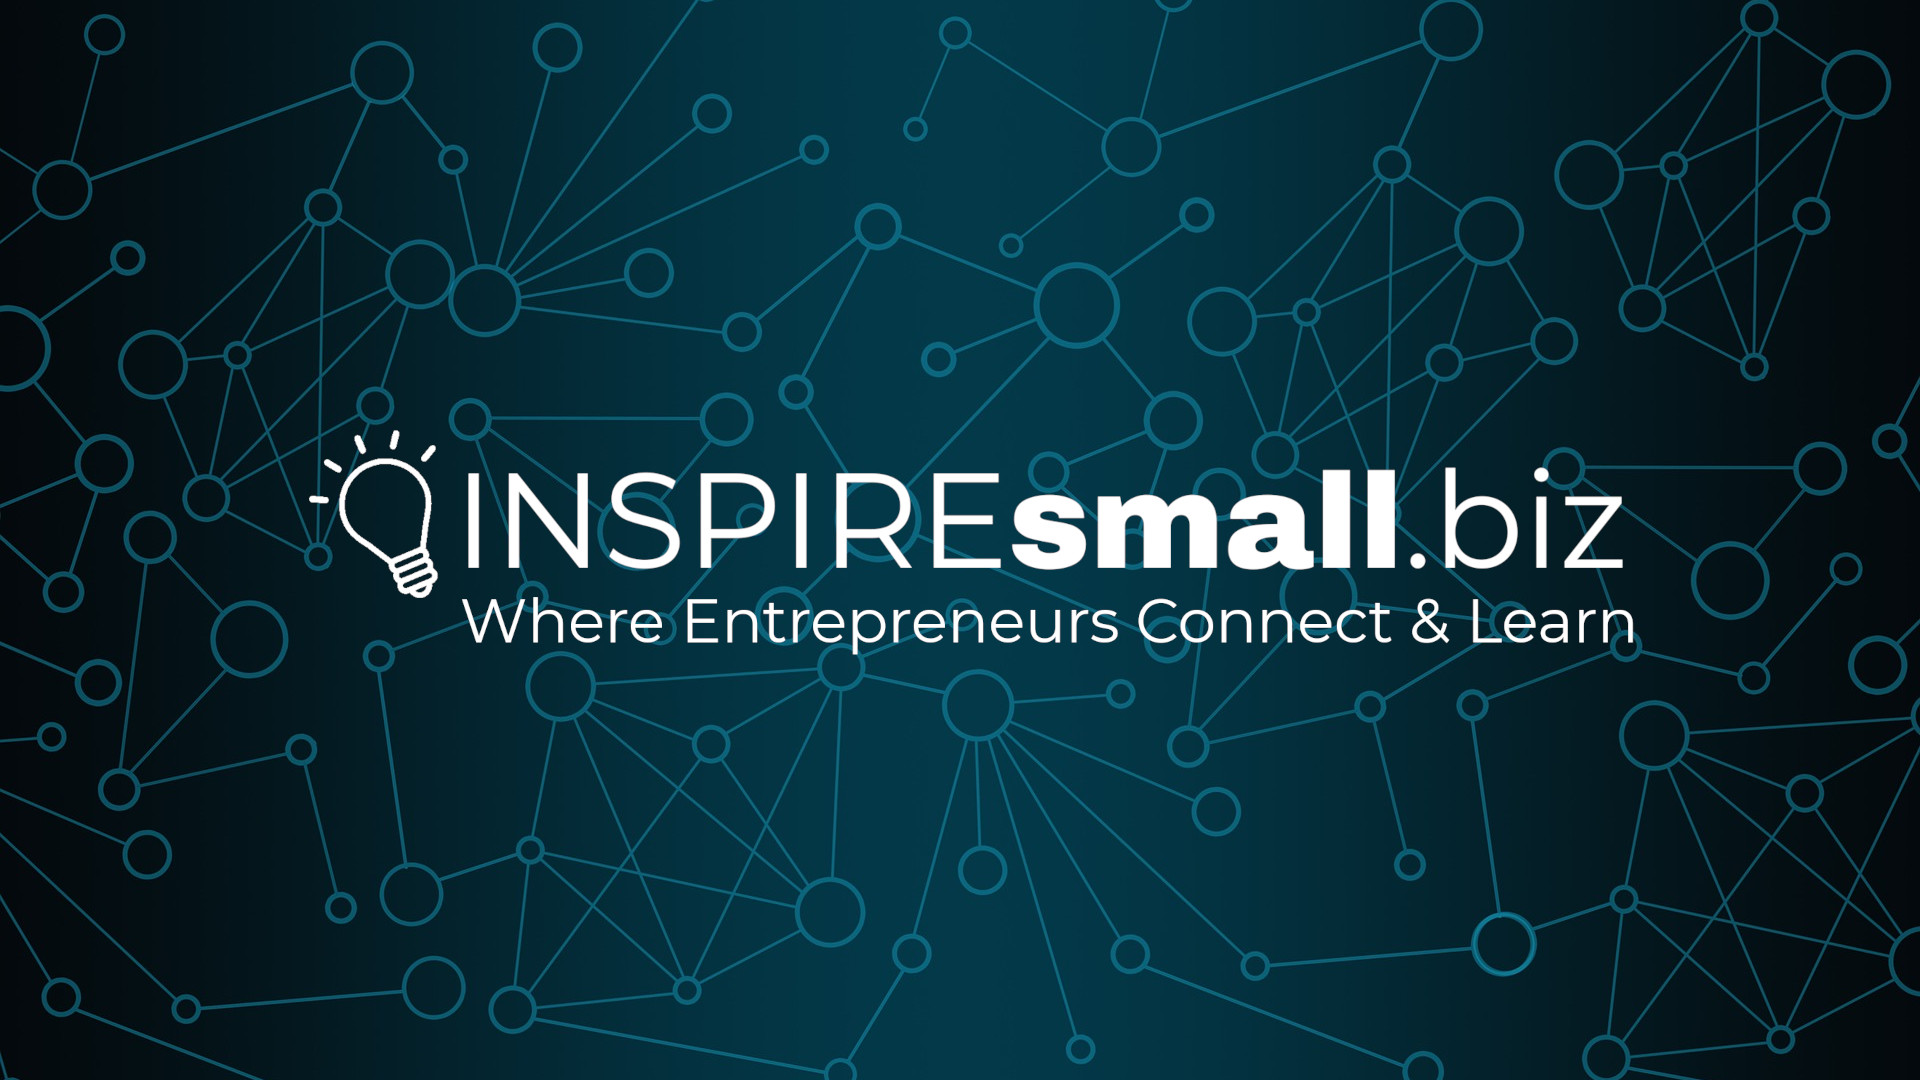 INSPIREsmall.biz: Where Entrepreneurs Connect and Learn, over a network of light blue nodes on a dark blue background.